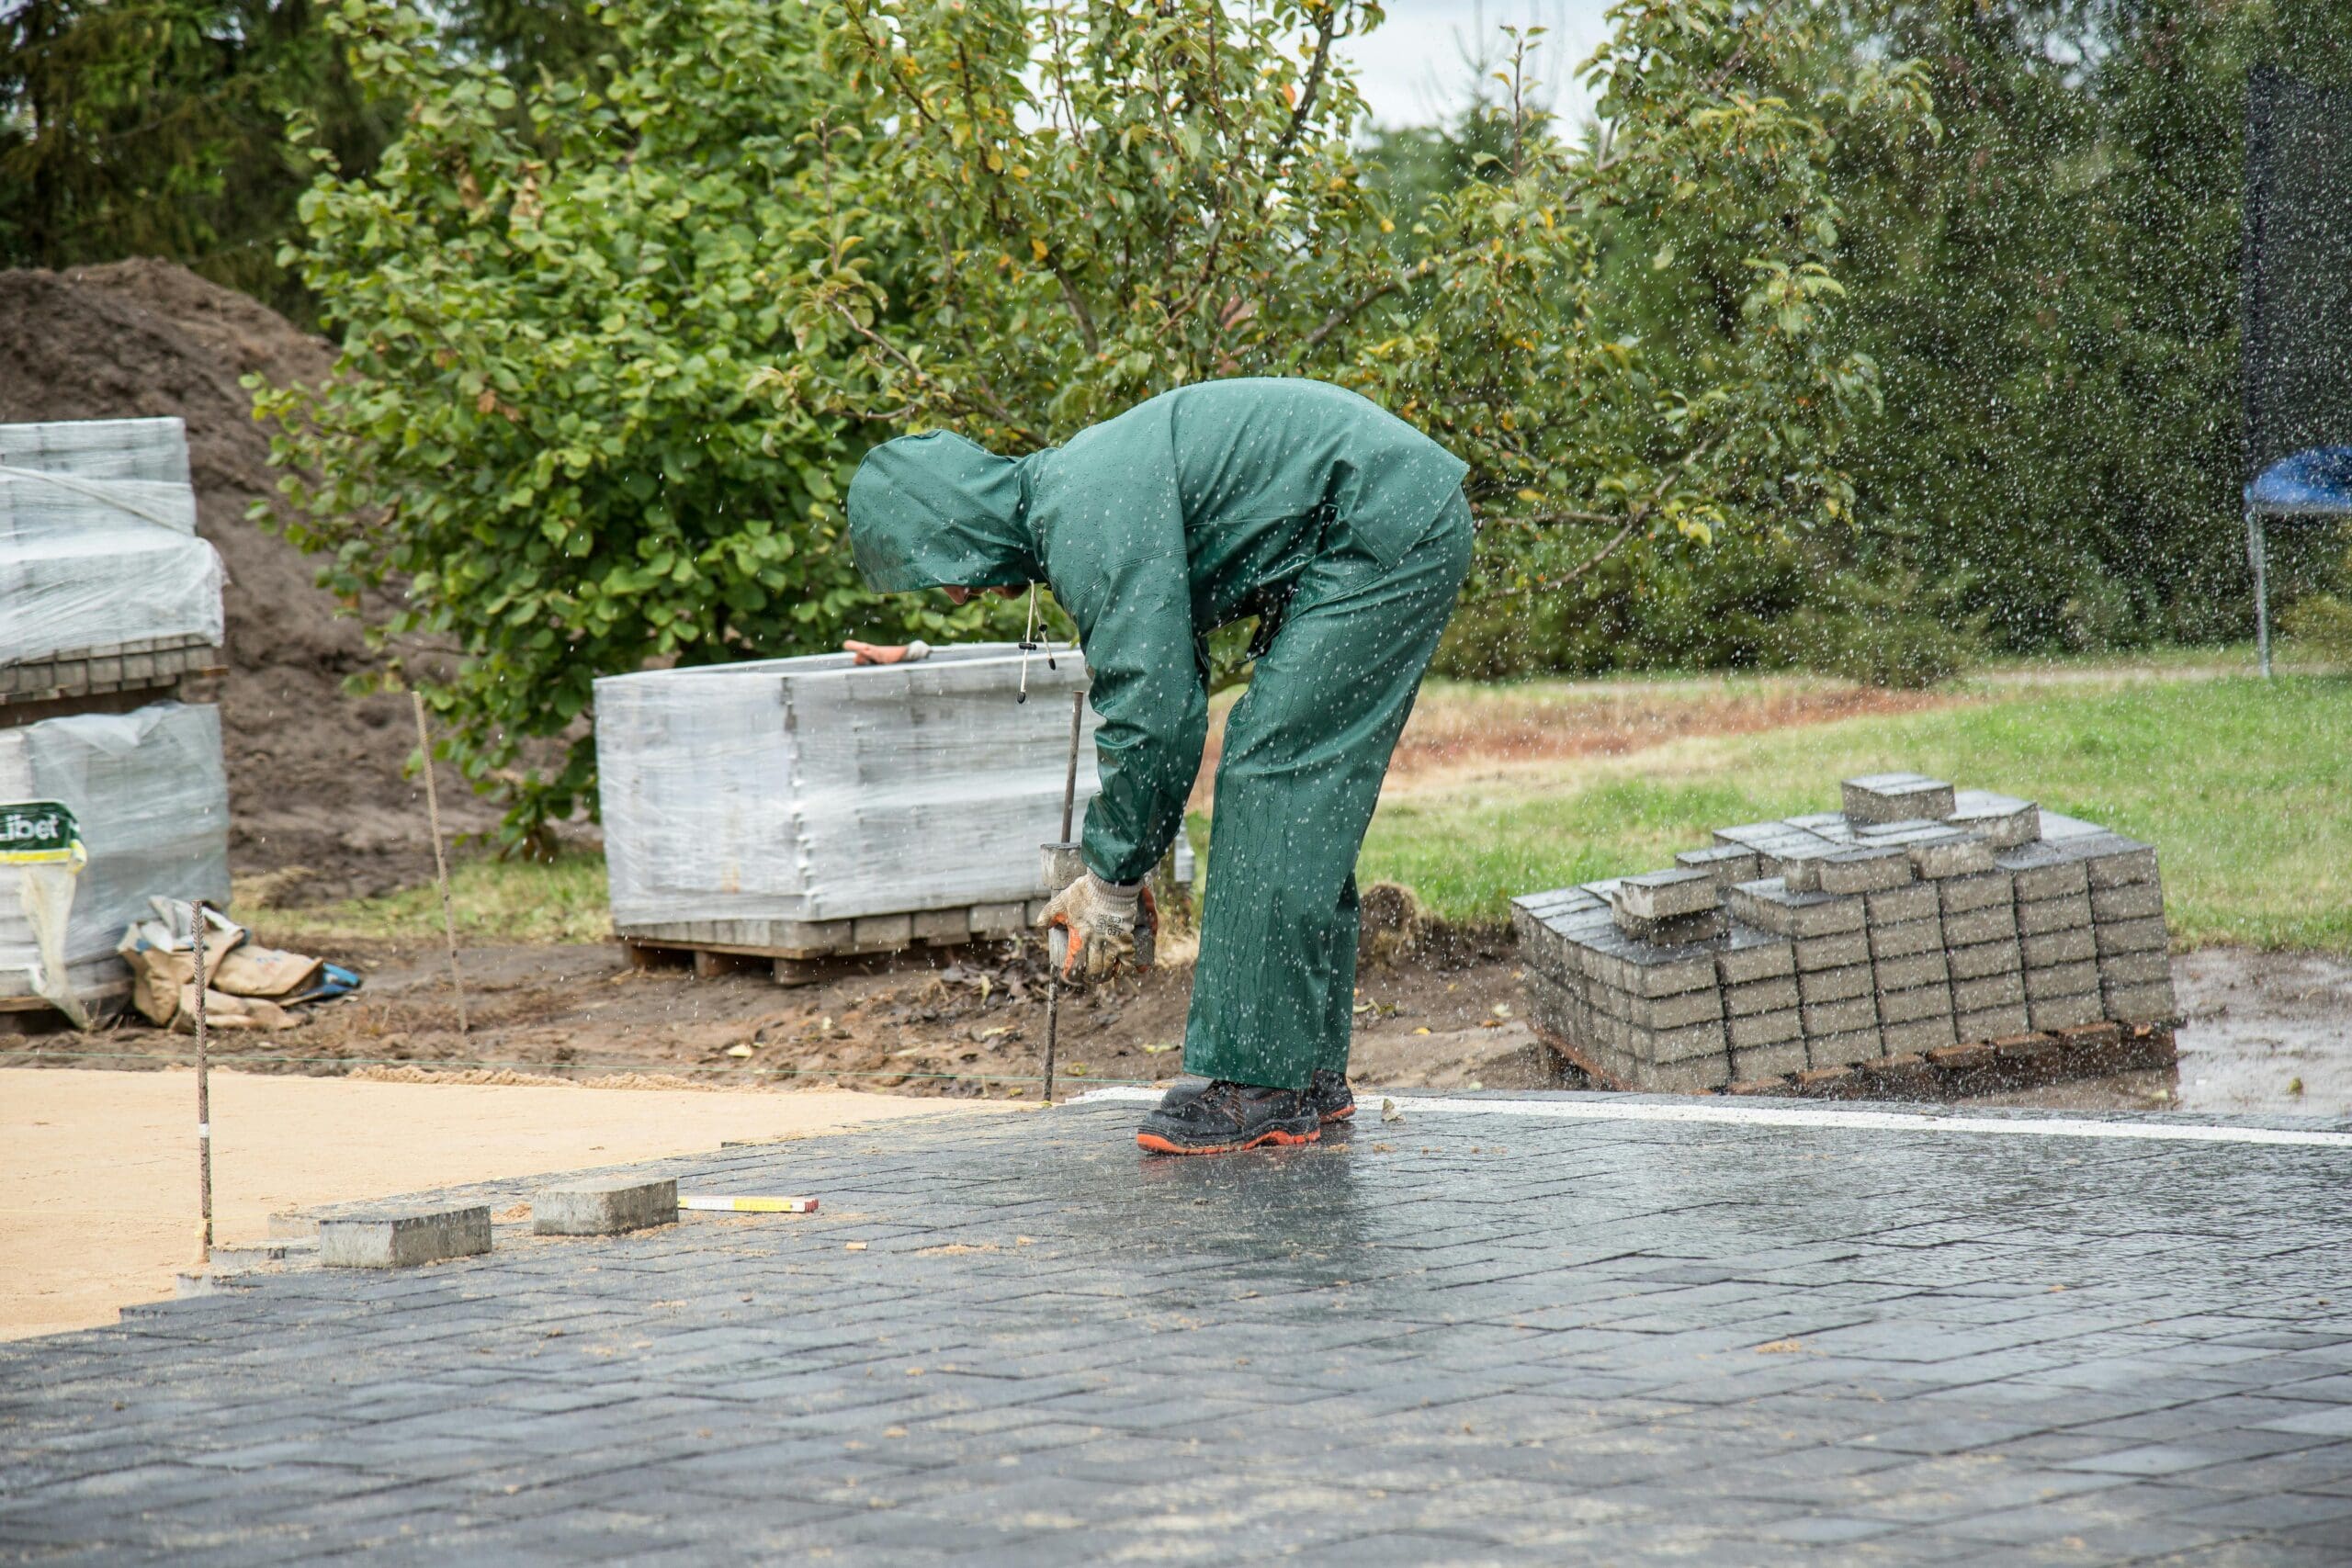 Installing pavers in the yard.